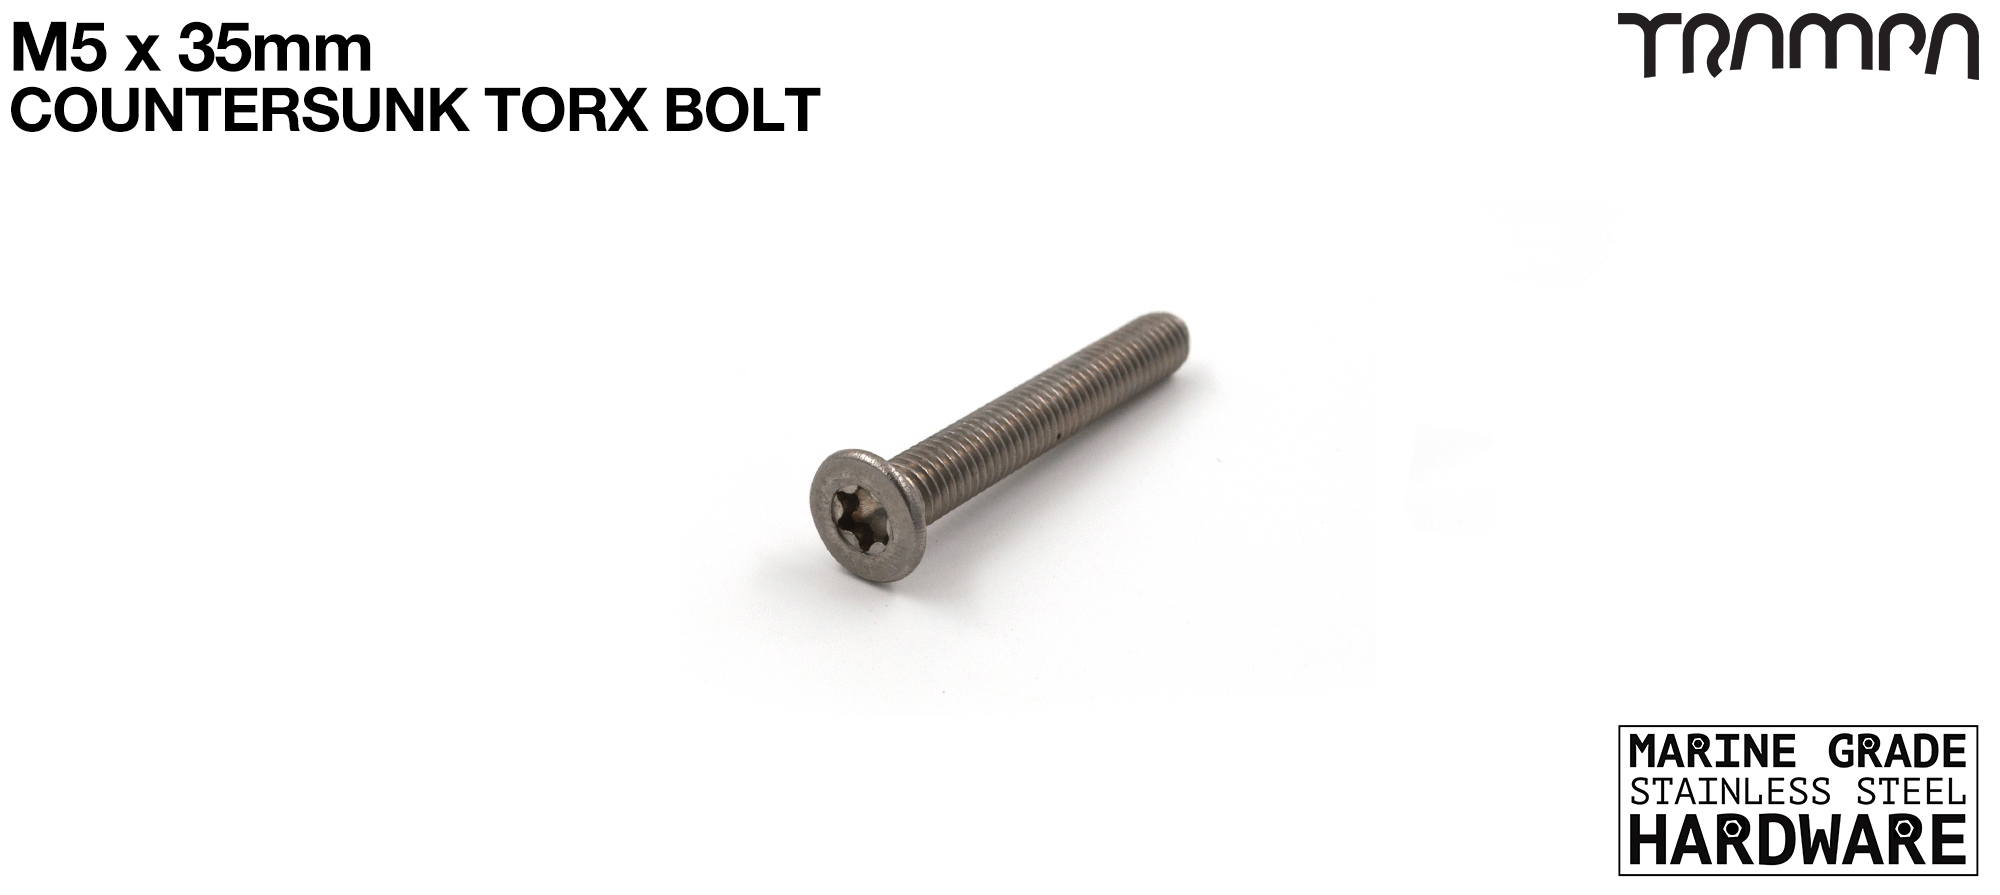 M5 x 35mm TORX Countersunk Bolt Stainless Steel 